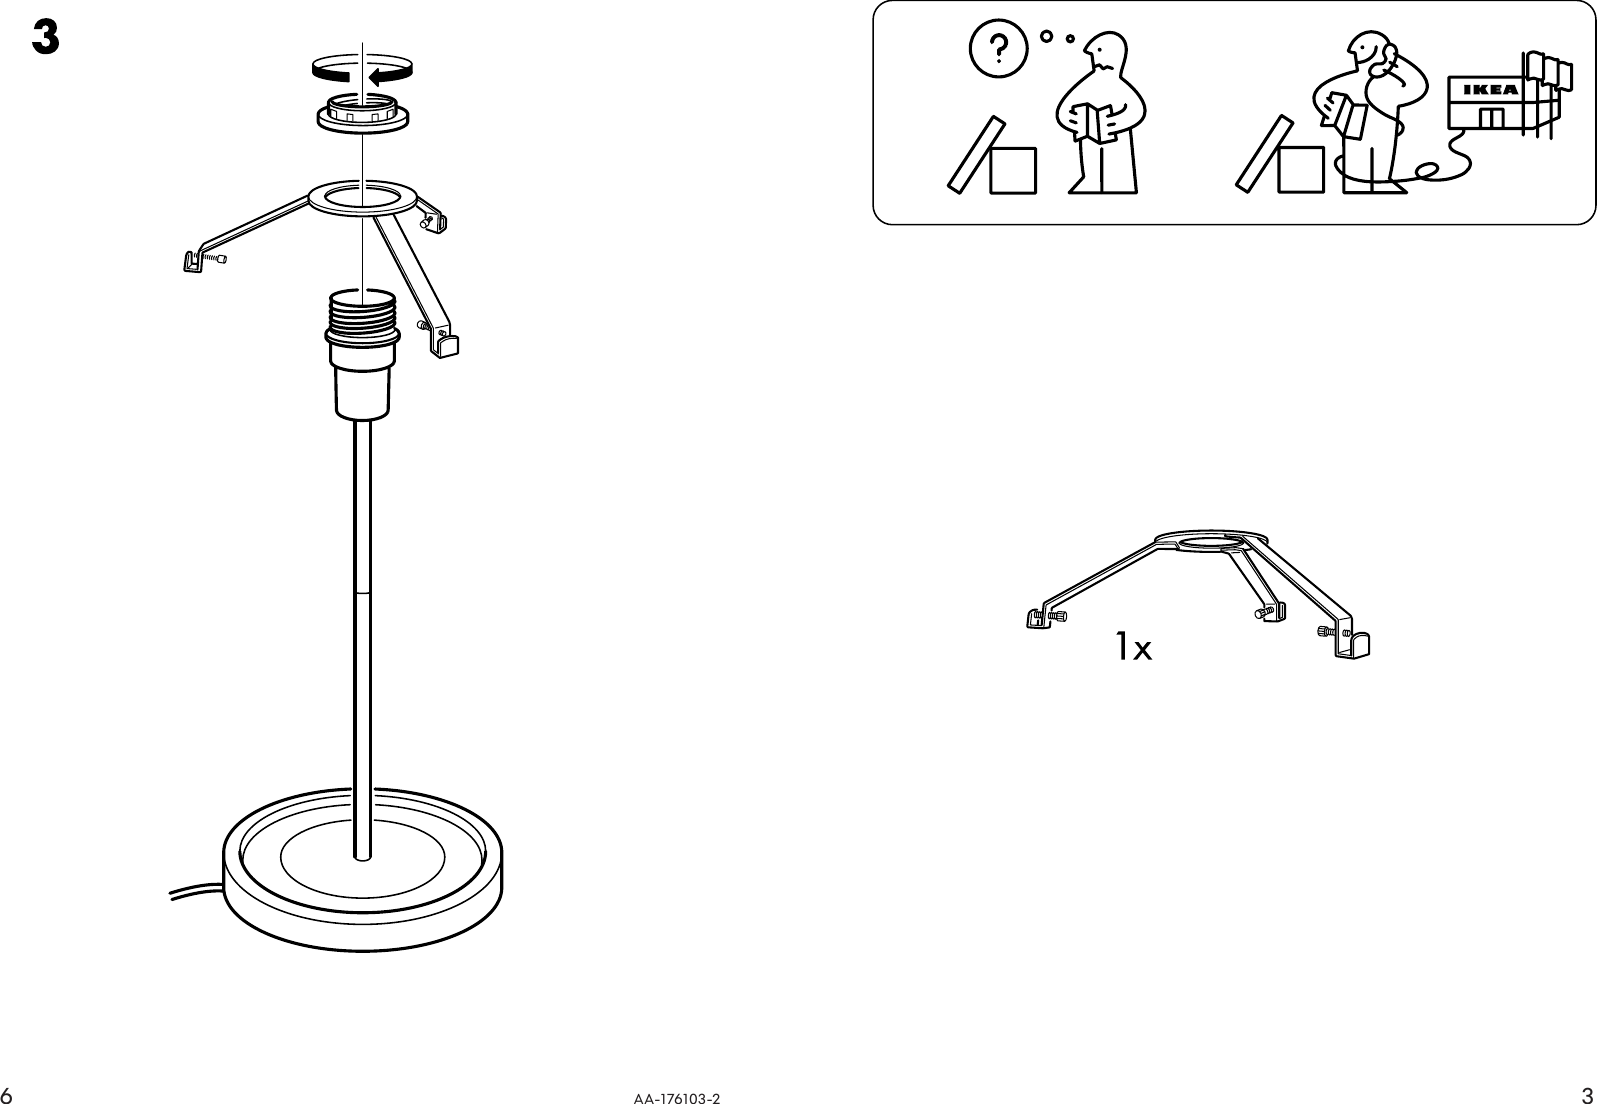 Page 3 of 4 - Ikea Ikea-Basisk-Table-Lamp-21-Assembly-Instruction-5  Ikea-basisk-table-lamp-21-assembly-instruction